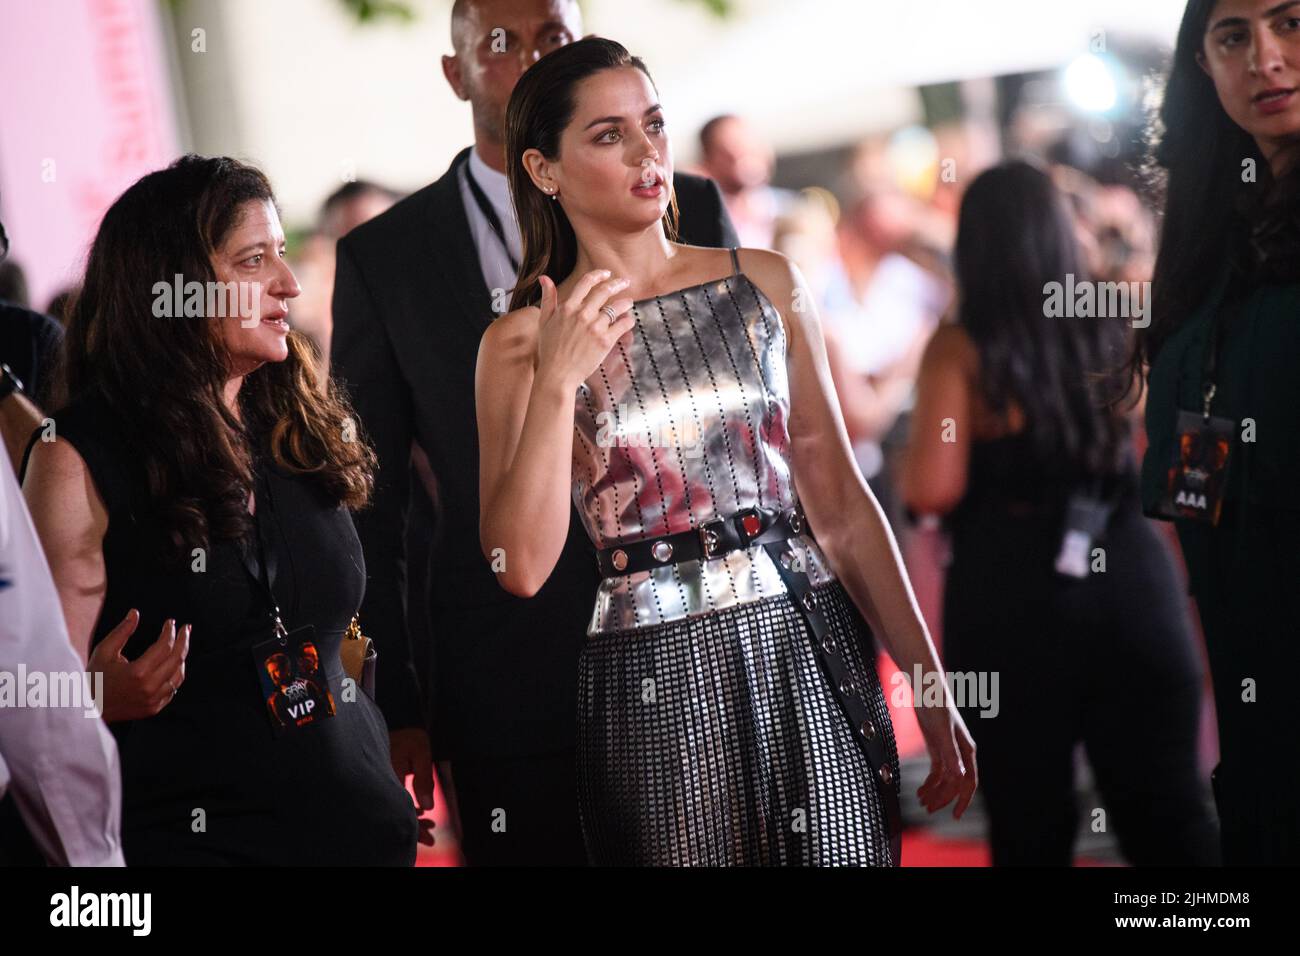 London, UK. 19 July 2022. Ana De Armas attending a special screening of The Gray Man, at BFI Southbank in London Picture date: Tuesday July 19, 2022. Photo credit should read: Matt Crossick/Empics/Alamy Live News Stock Photo